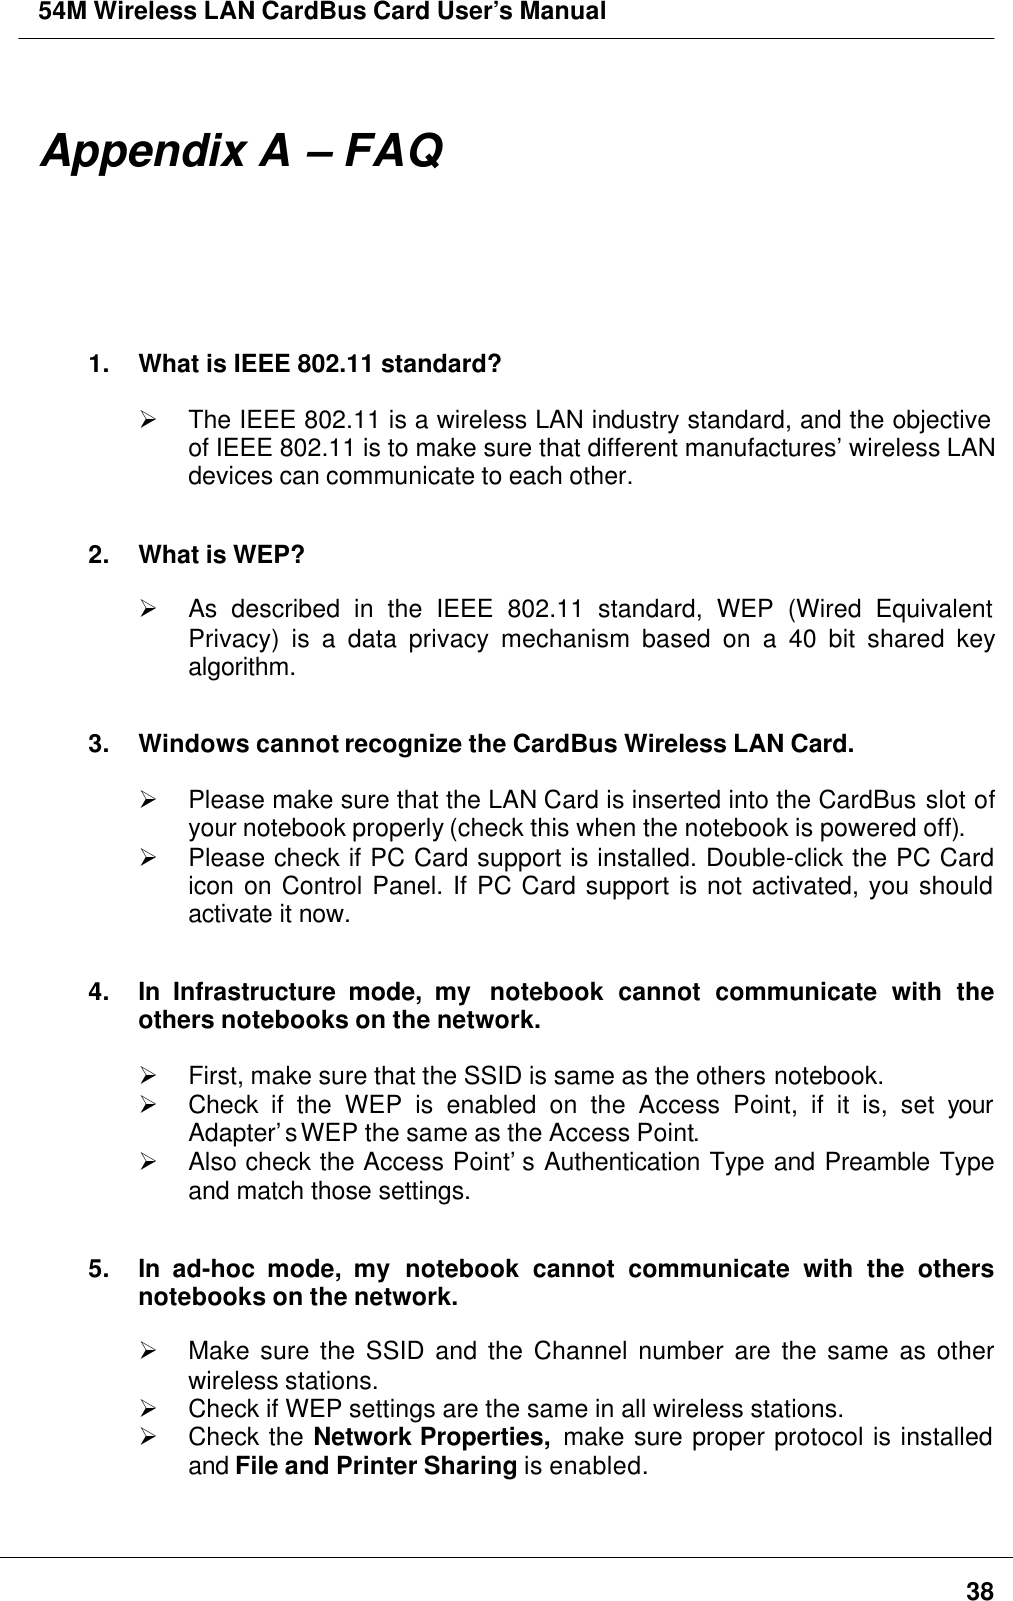 54M Wireless LAN CardBus Card User’s Manual38Appendix A – FAQ1. What is IEEE 802.11 standard?Ø The IEEE 802.11 is a wireless LAN industry standard, and the objectiveof IEEE 802.11 is to make sure that different manufactures’ wireless LANdevices can communicate to each other.2. What is WEP?Ø As described in the IEEE 802.11 standard, WEP (Wired EquivalentPrivacy) is a data privacy mechanism based on a 40 bit shared keyalgorithm.3. Windows cannot recognize the CardBus Wireless LAN Card.Ø Please make sure that the LAN Card is inserted into the CardBus slot ofyour notebook properly (check this when the notebook is powered off).Ø Please check if PC Card support is installed. Double-click the PC Cardicon on Control Panel. If PC Card support is not activated, you shouldactivate it now.4. In Infrastructure mode, my  notebook cannot communicate with theothers notebooks on the network.Ø First, make sure that the SSID is same as the others notebook.Ø Check  if the WEP is enabled on the Access Point, if it is, set yourAdapter’s WEP the same as the Access Point.Ø Also check the Access Point’s Authentication Type and Preamble Typeand match those settings.5. In  ad-hoc mode, my notebook cannot communicate with the othersnotebooks on the network.Ø Make sure the SSID and the Channel number are the same as otherwireless stations.Ø Check if WEP settings are the same in all wireless stations.Ø Check the Network Properties,  make sure proper protocol is installedand File and Printer Sharing is enabled.